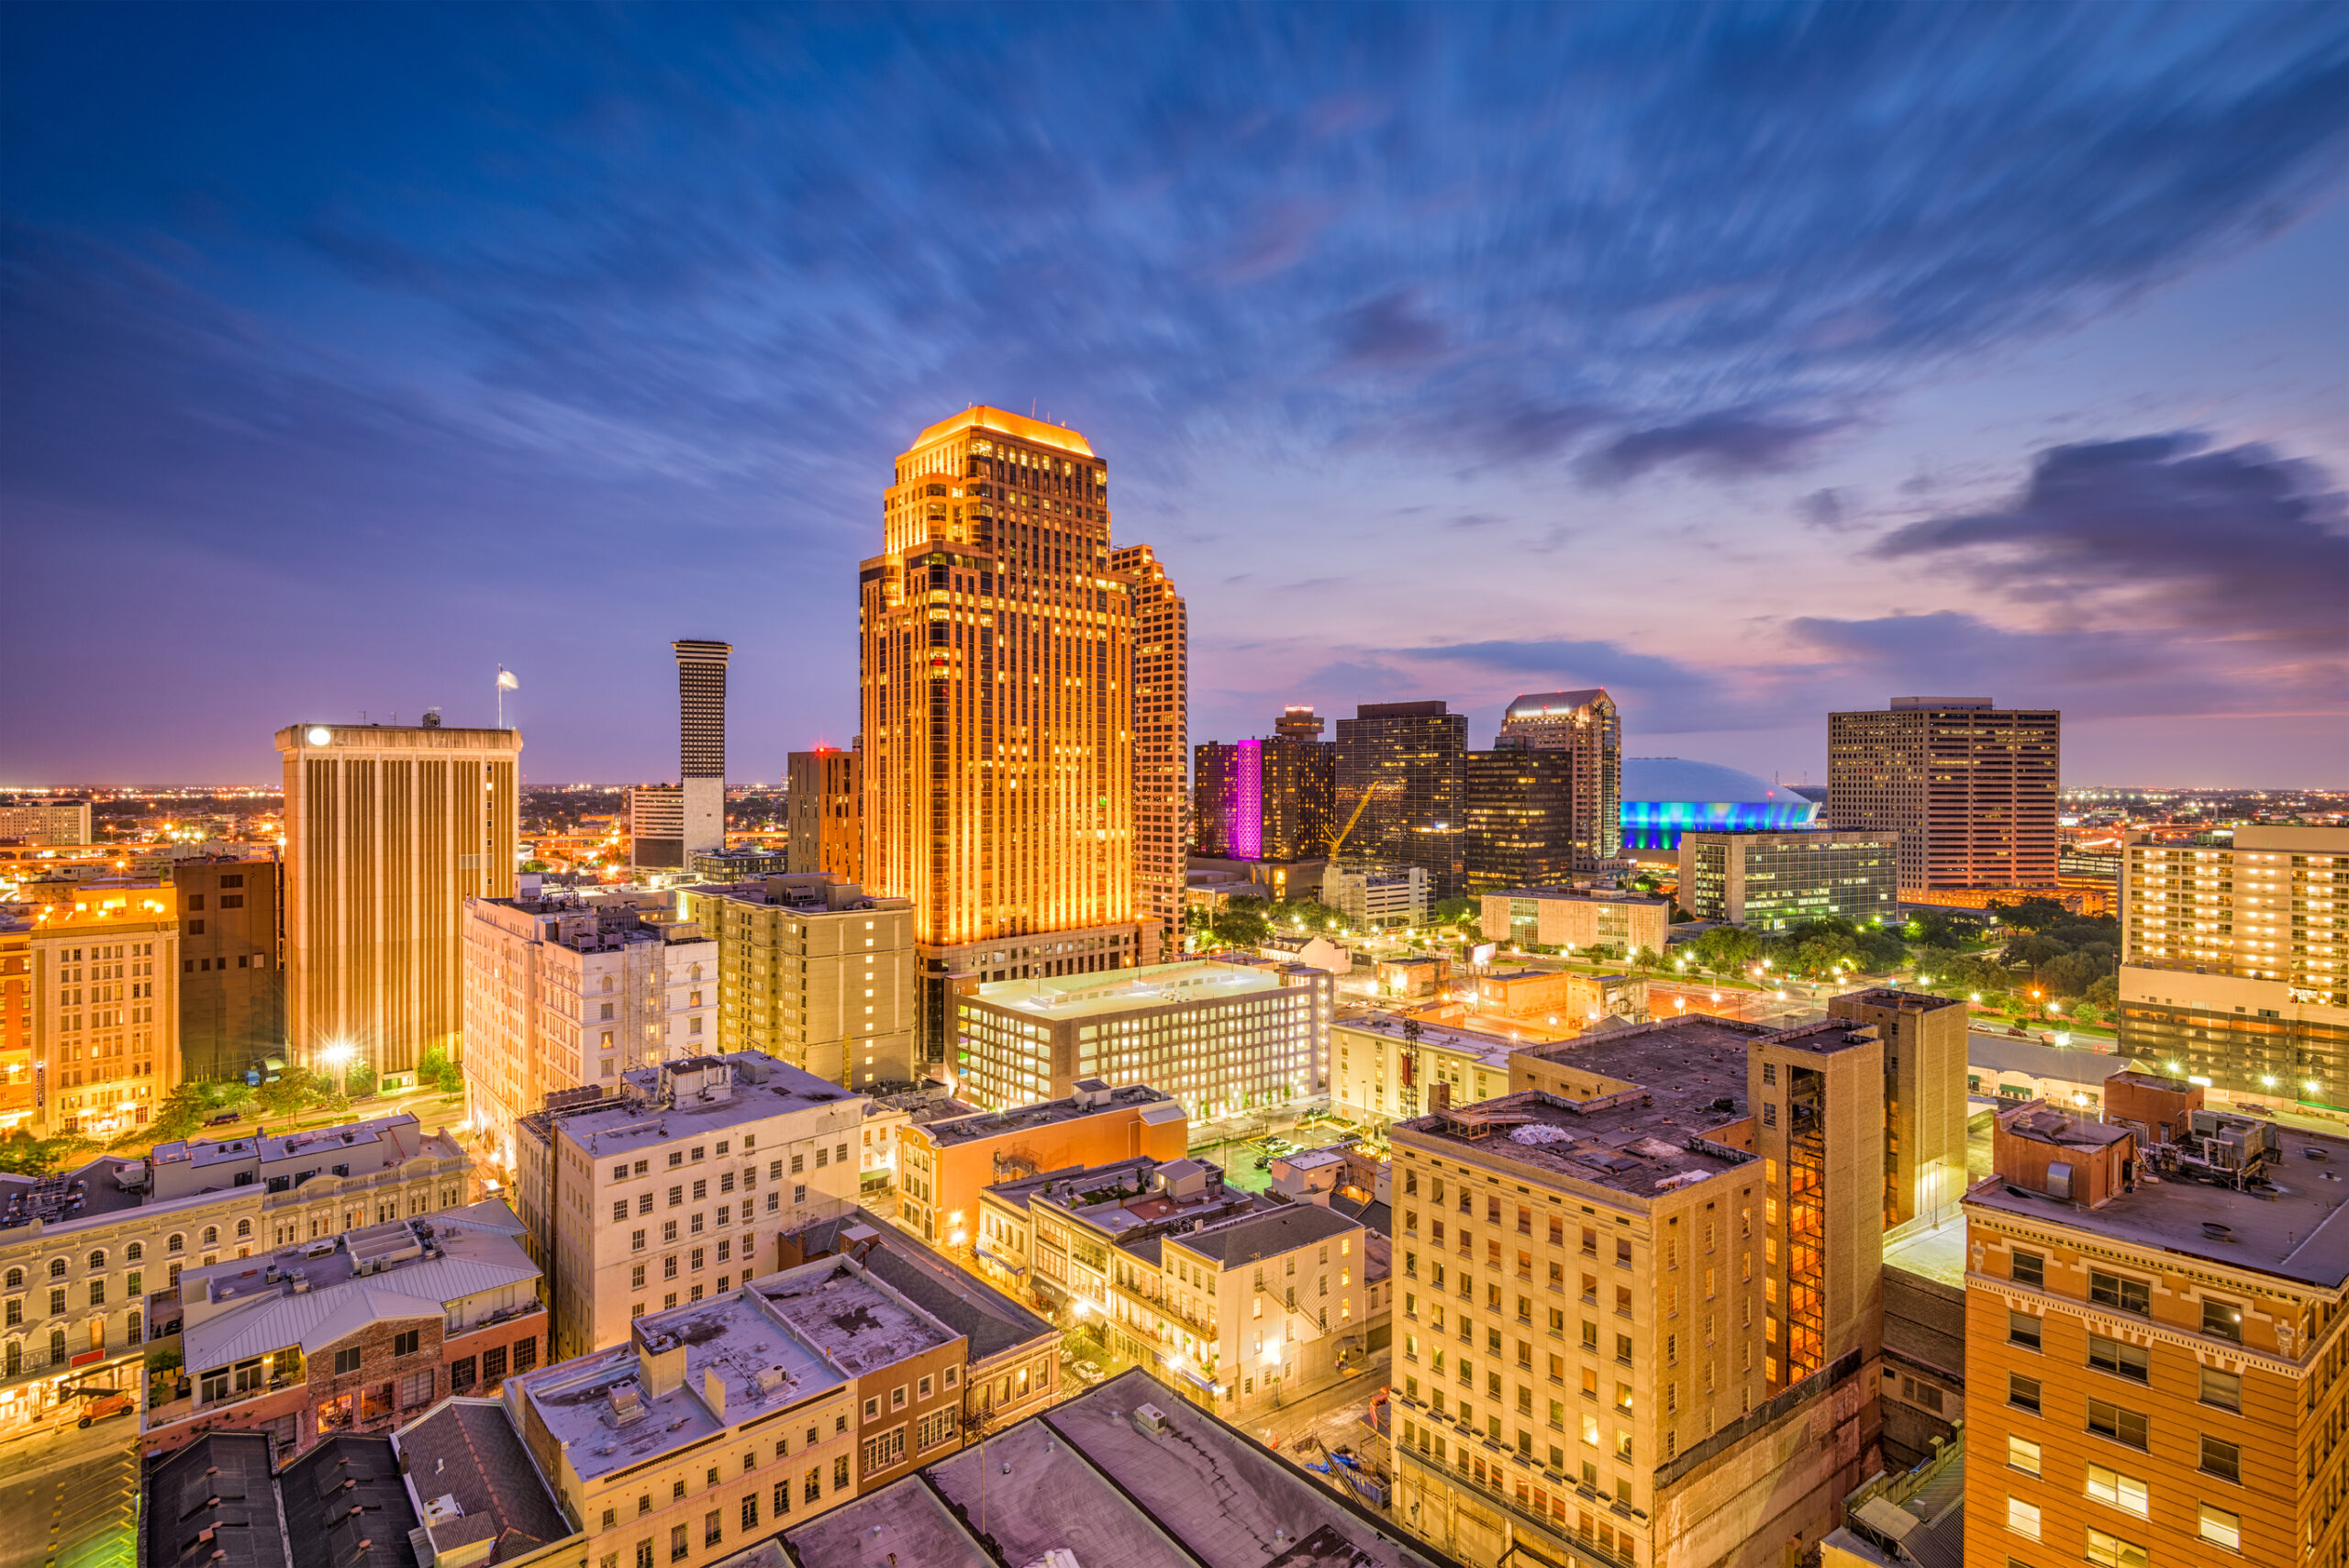 New Orleans Louisiana USA. Best Cities To Photograph in USA